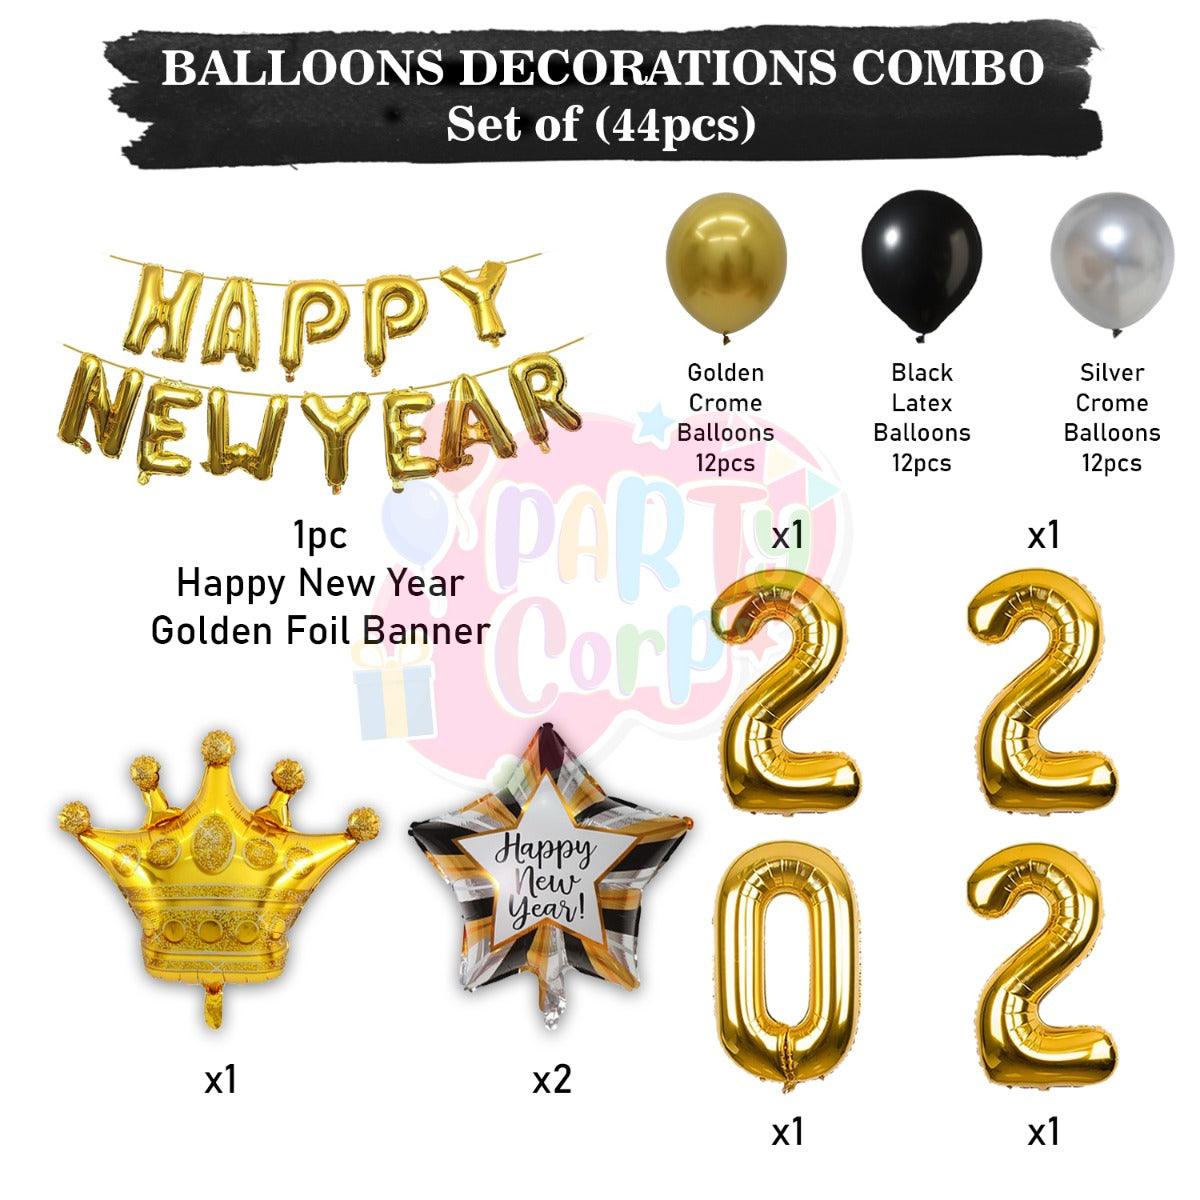 PartyCorp New Year Decoration Kit Combo 44 Pcs - Gold, Silver Chrome Balloons, Black Latex Balloon, Gold Happy New Year Foil Banner, Gold Crown, Happy New Year Star, 2022 Digit Foil Balloons